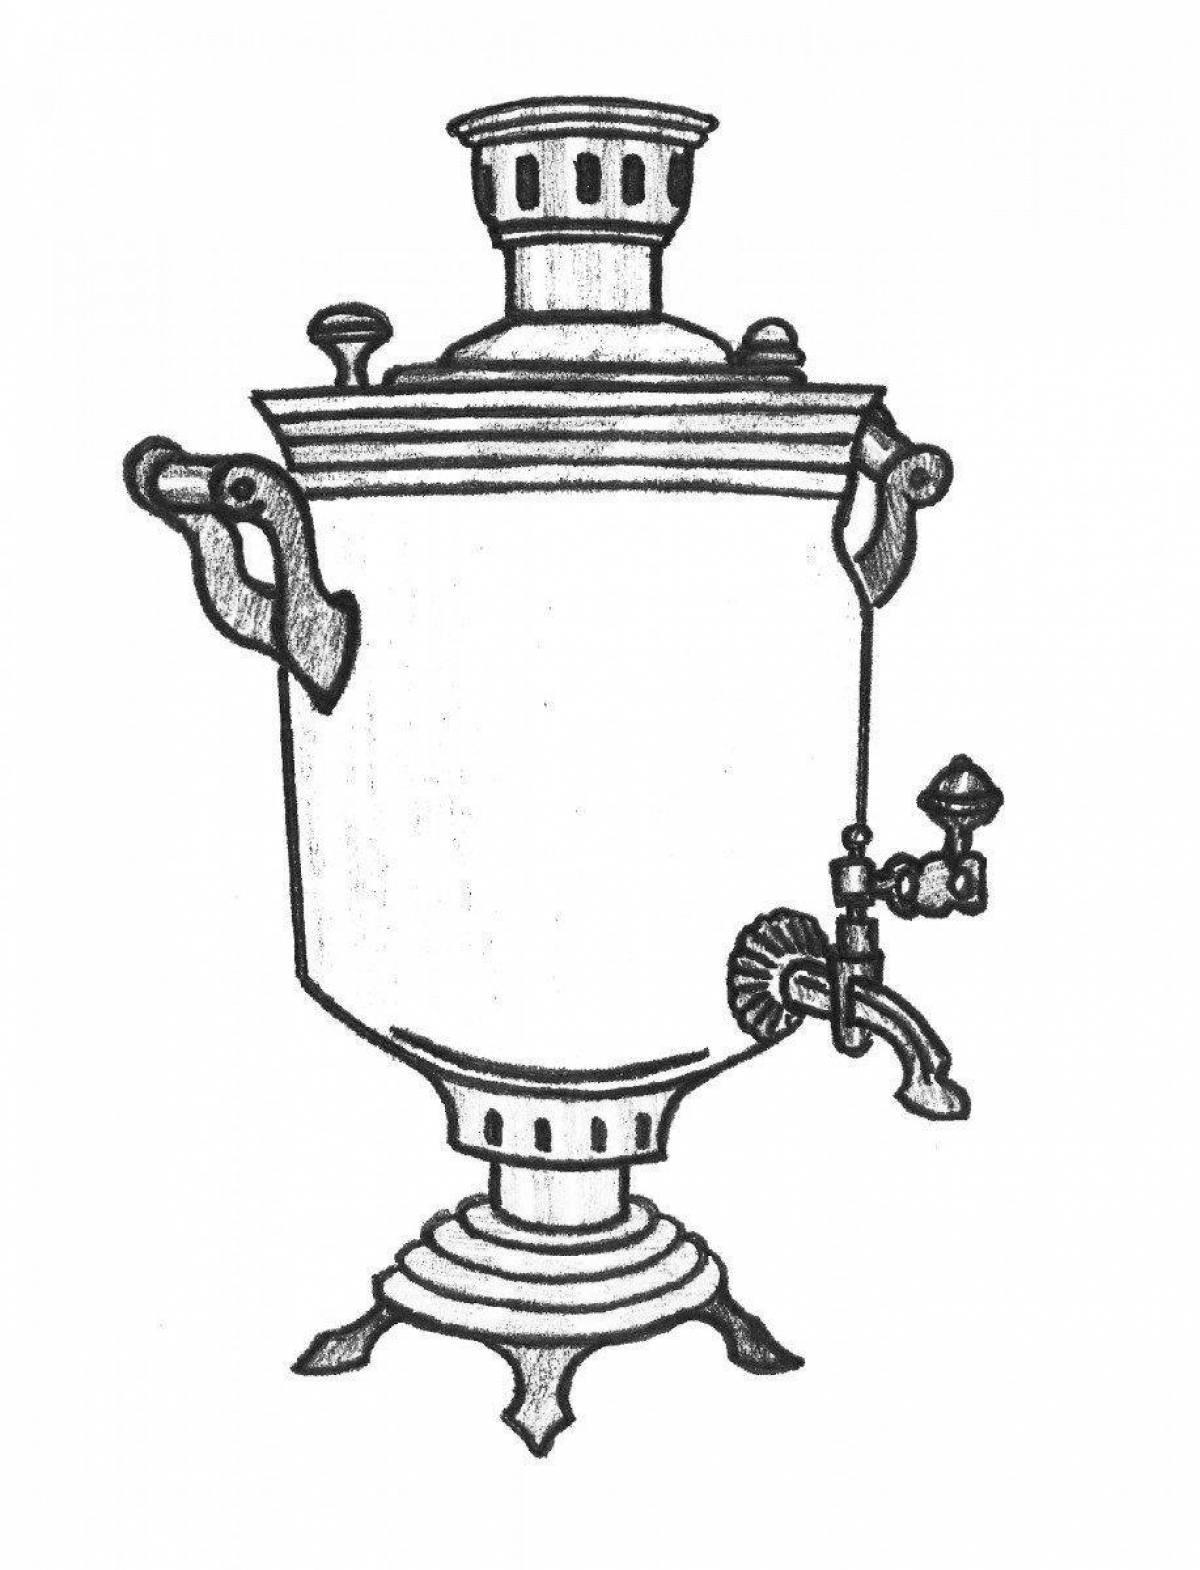 Detail drawing of a samovar